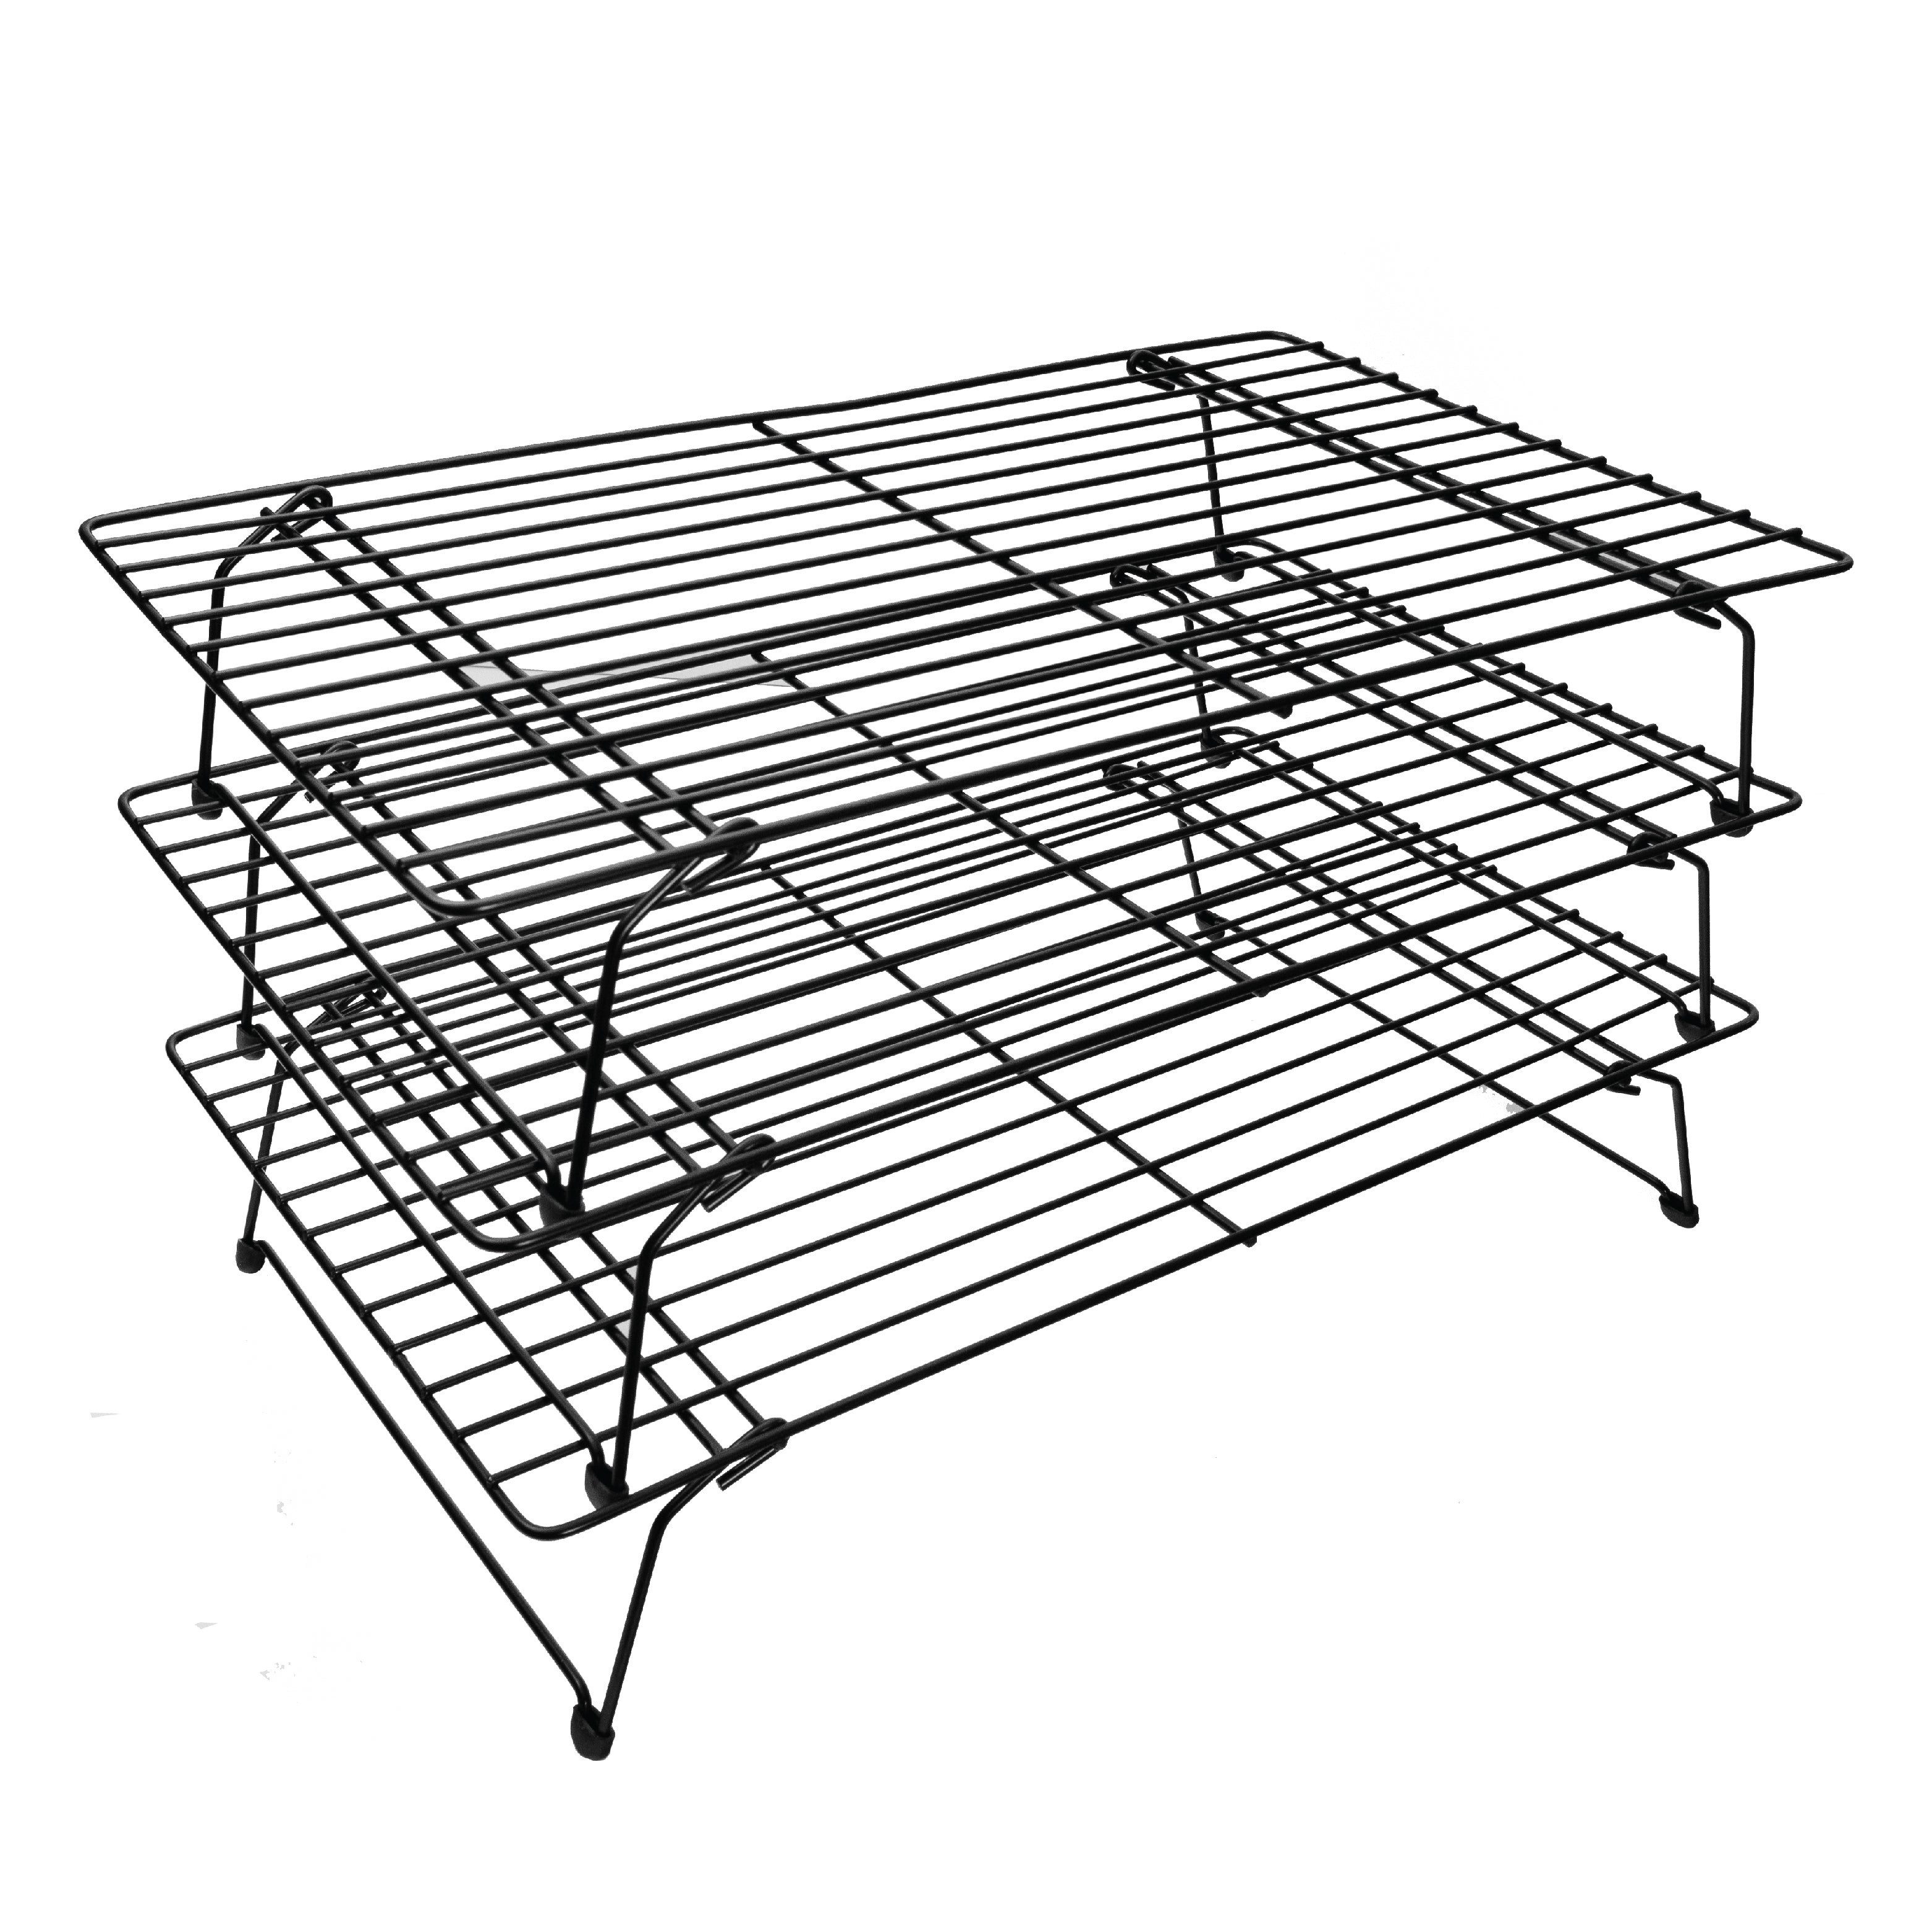 Stainless Steel Baking Tray Cooling Rack Set Grid Baking Tray Wire